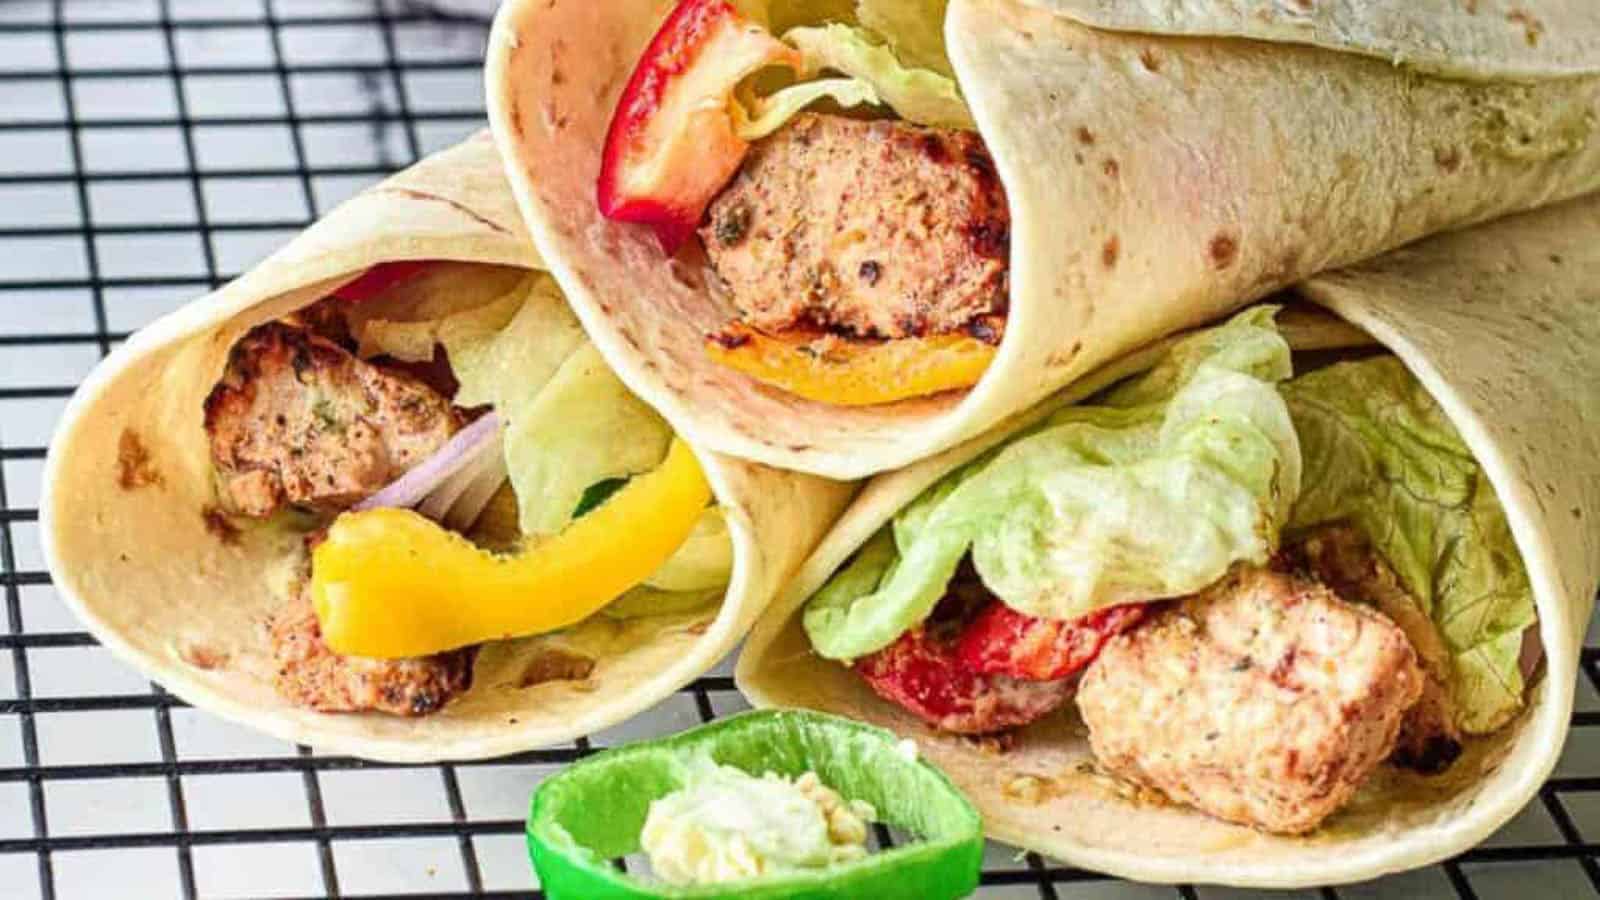 Three wraps with meat and vegetables on a cooling rack.